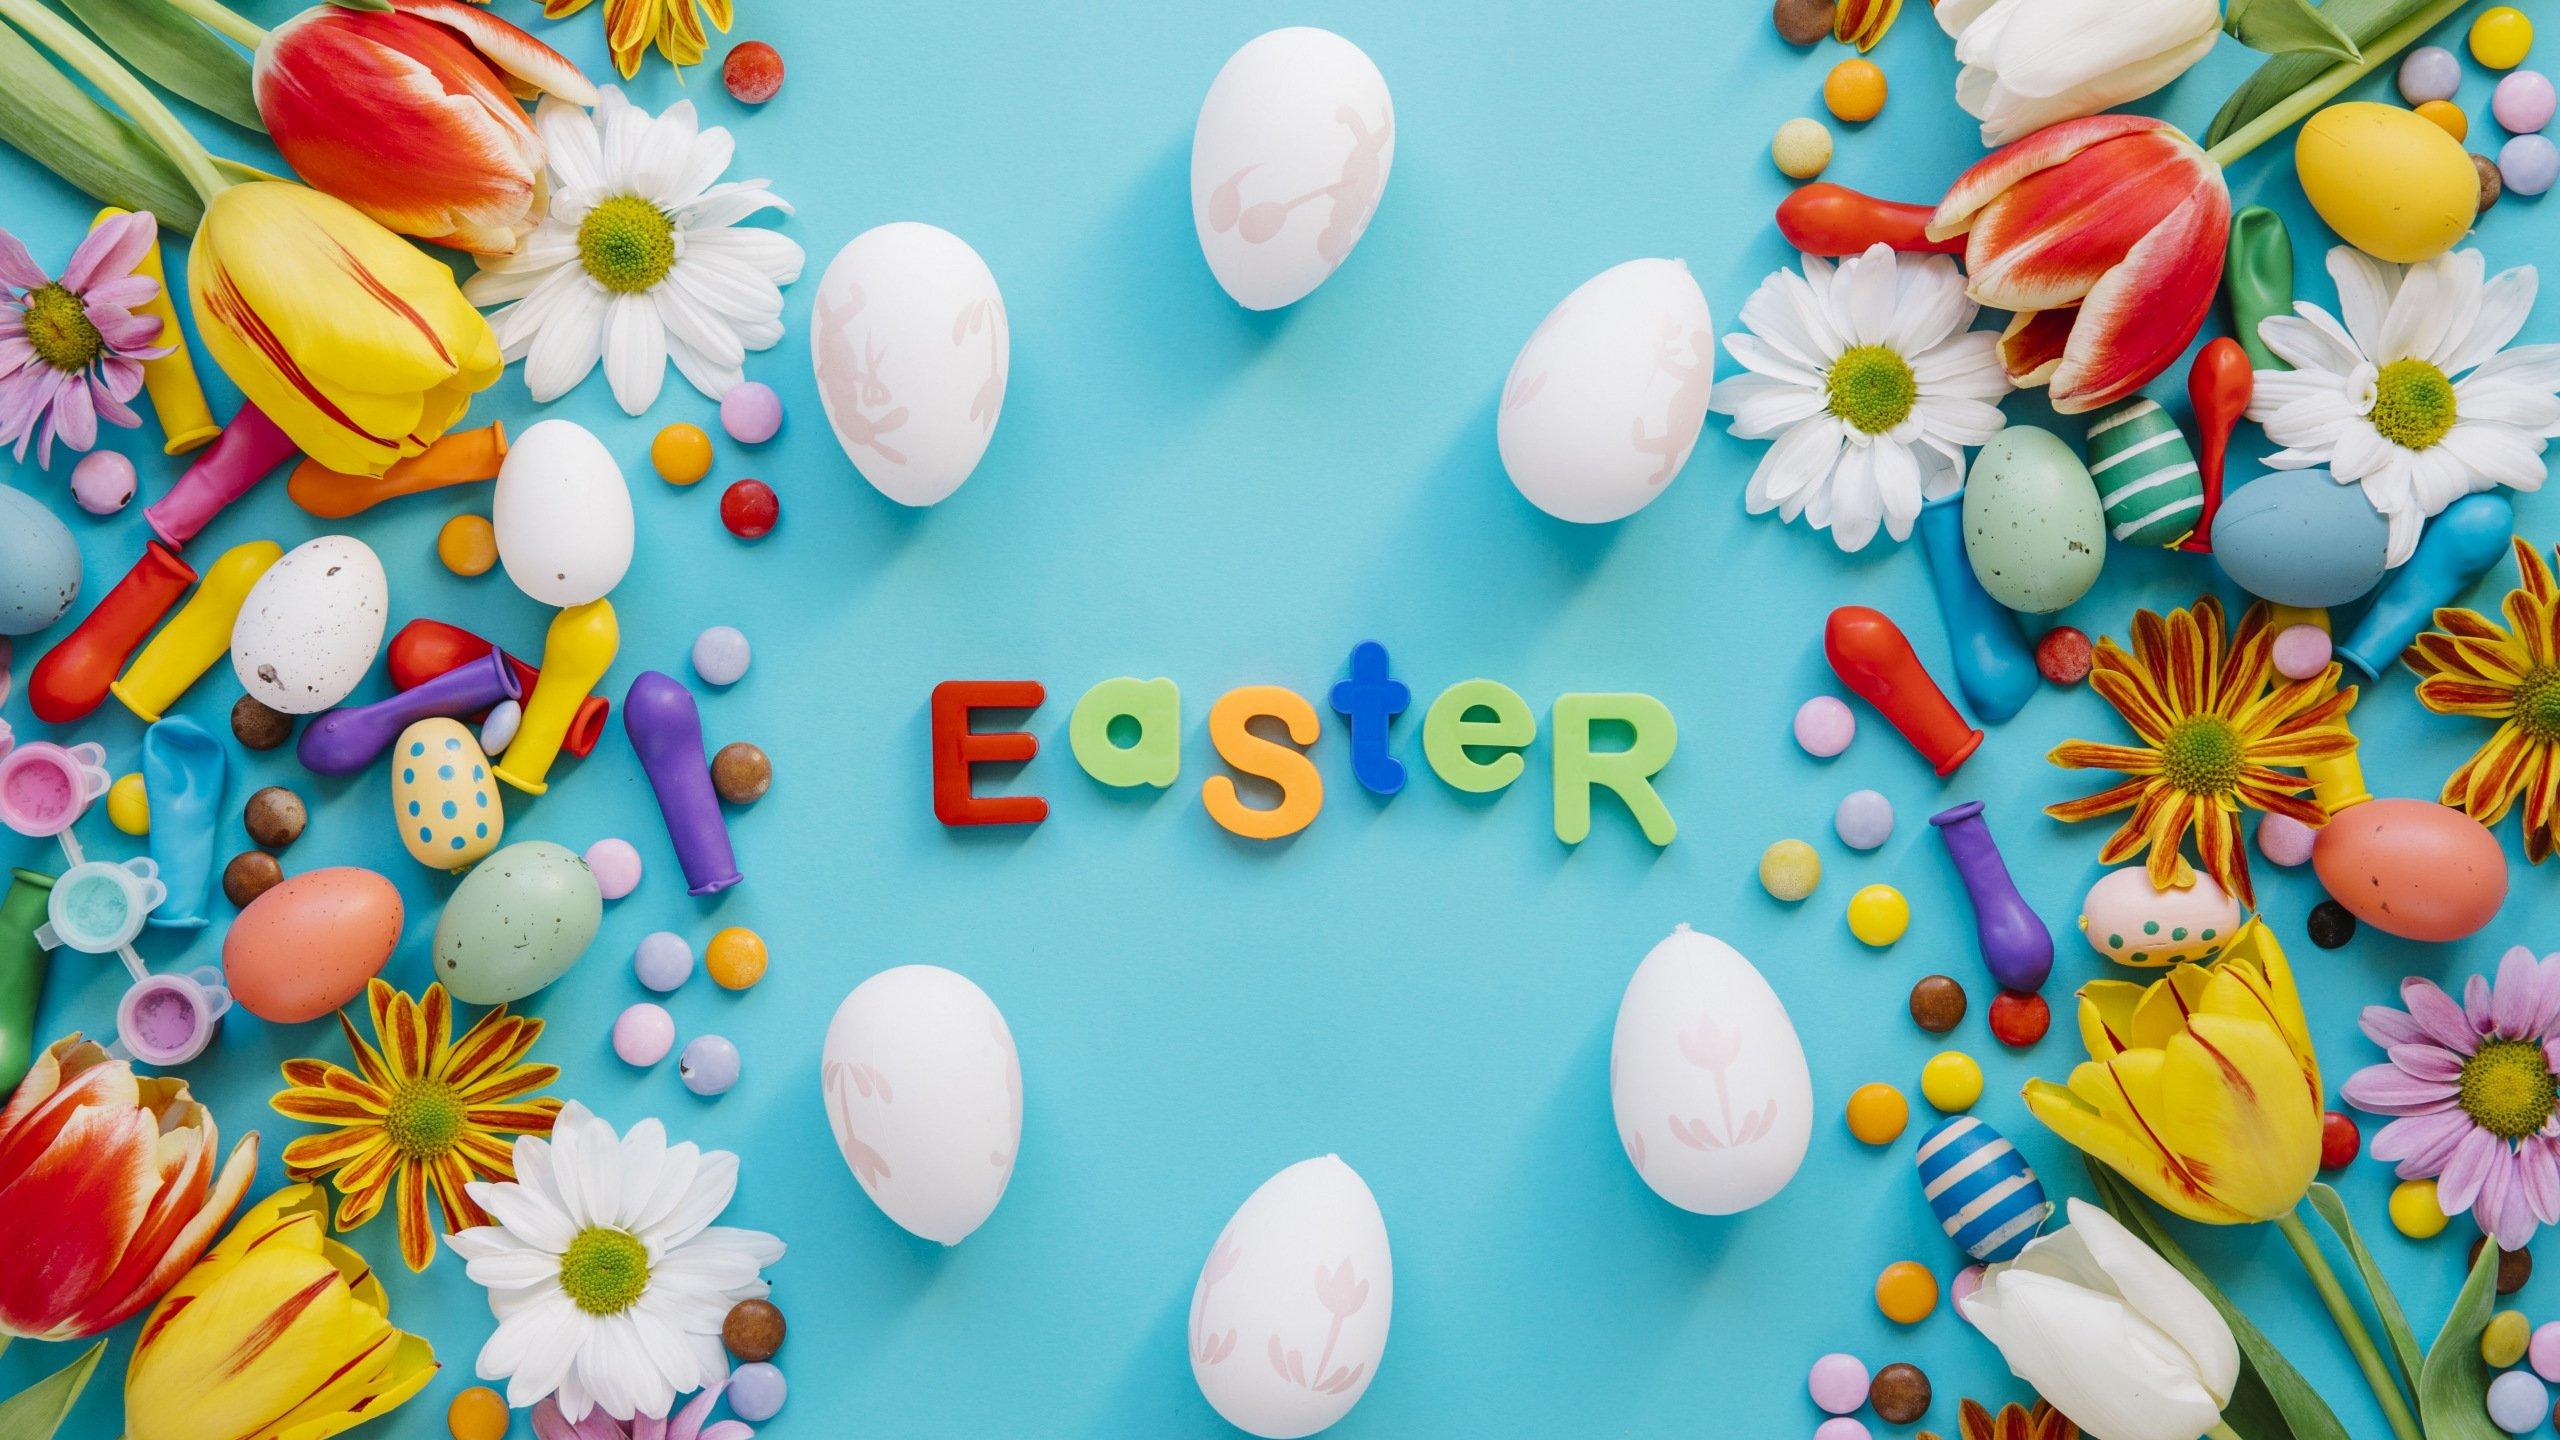 Easter 4K wallpaper for your desktop or mobile screen free and easy to download